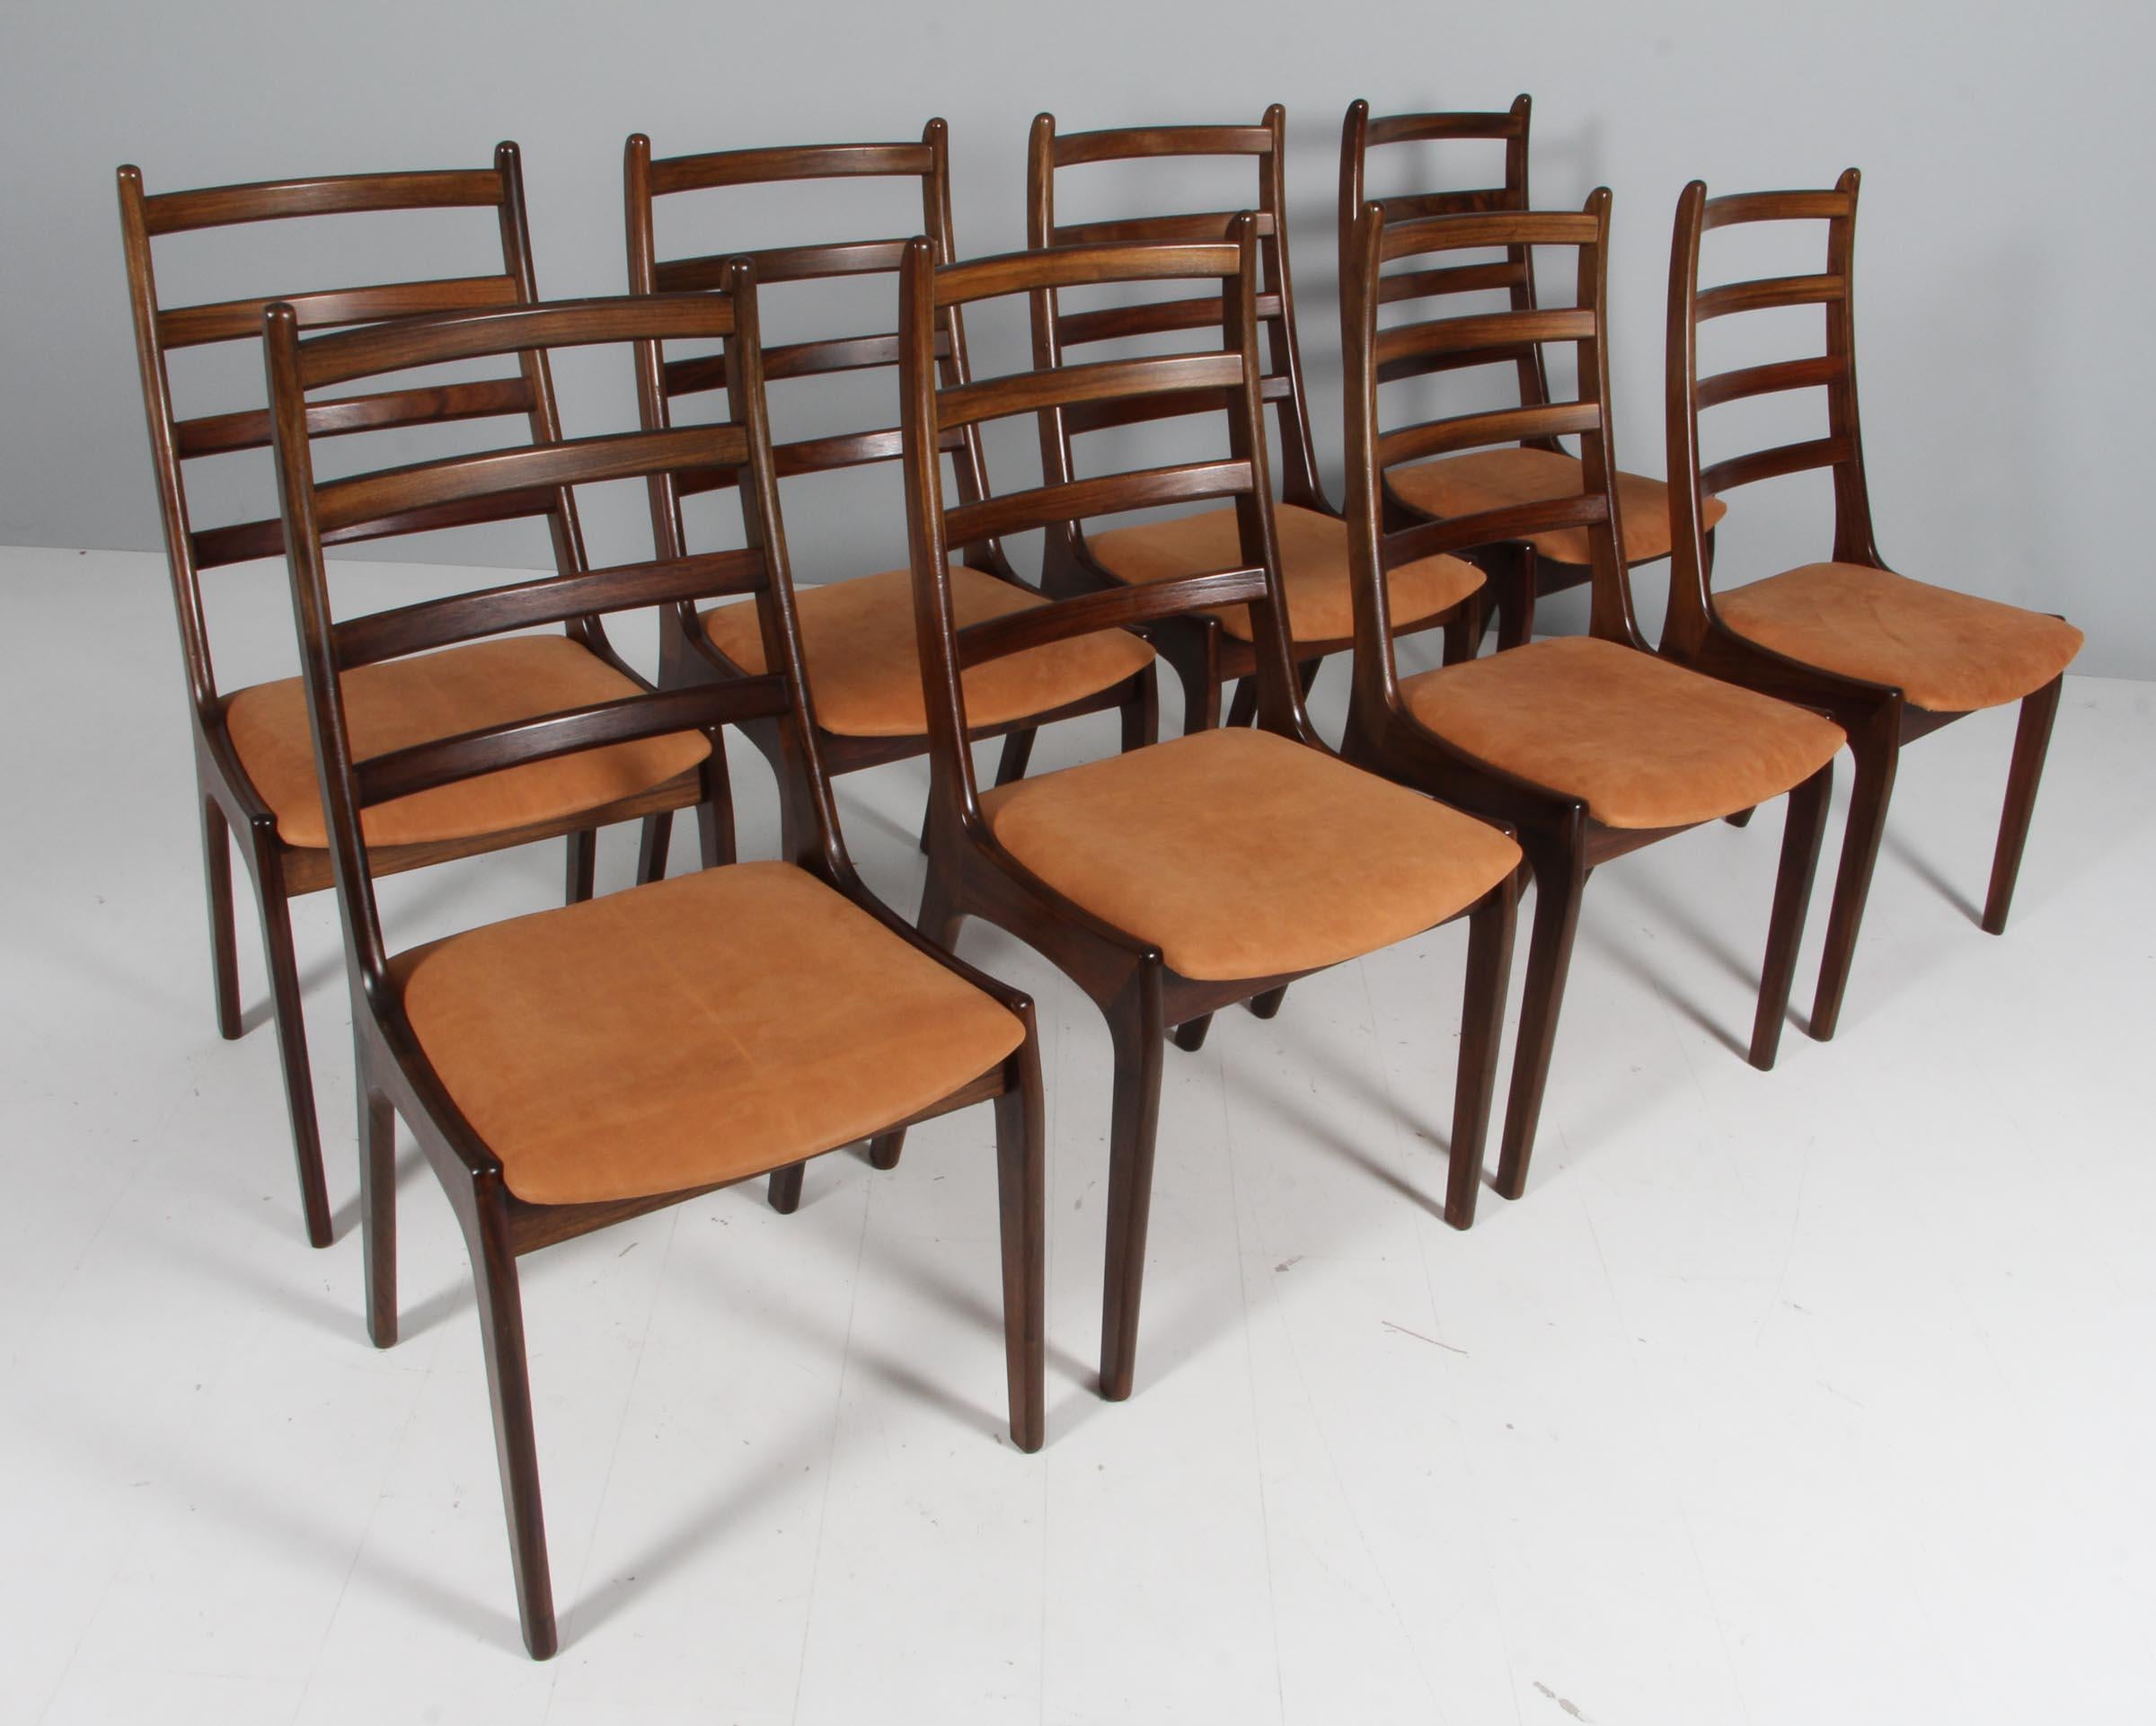 Korup Stolefabrik set of eight chairs of rosewood.

New upholstered with Dunes leather from Arne Sørensen.

Made by Korup Stolefabrik.
